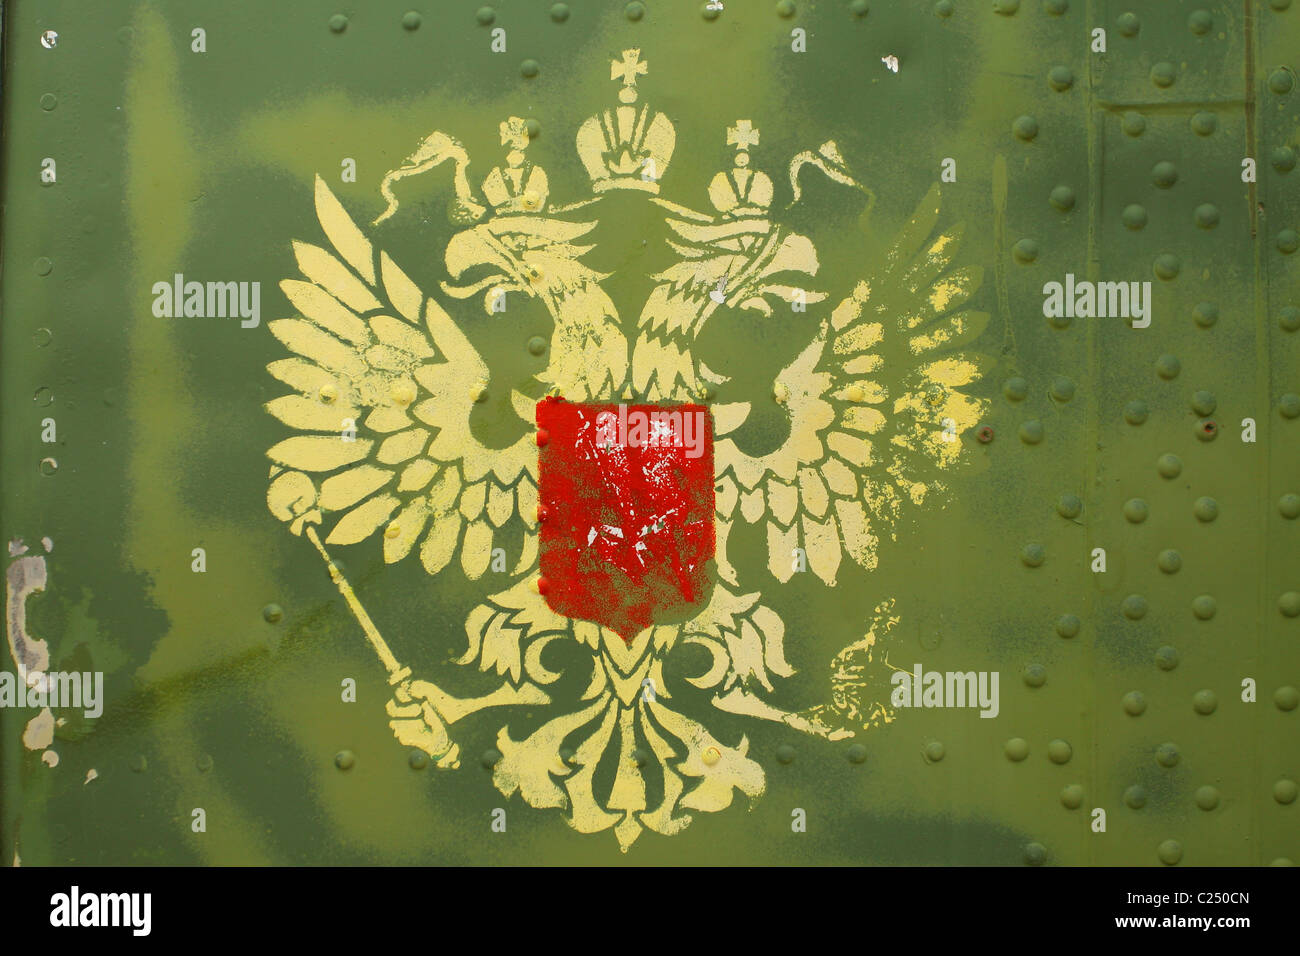 The Russian coat of arms printed on the board of a military helicopter. RUSSIA Stock Photo